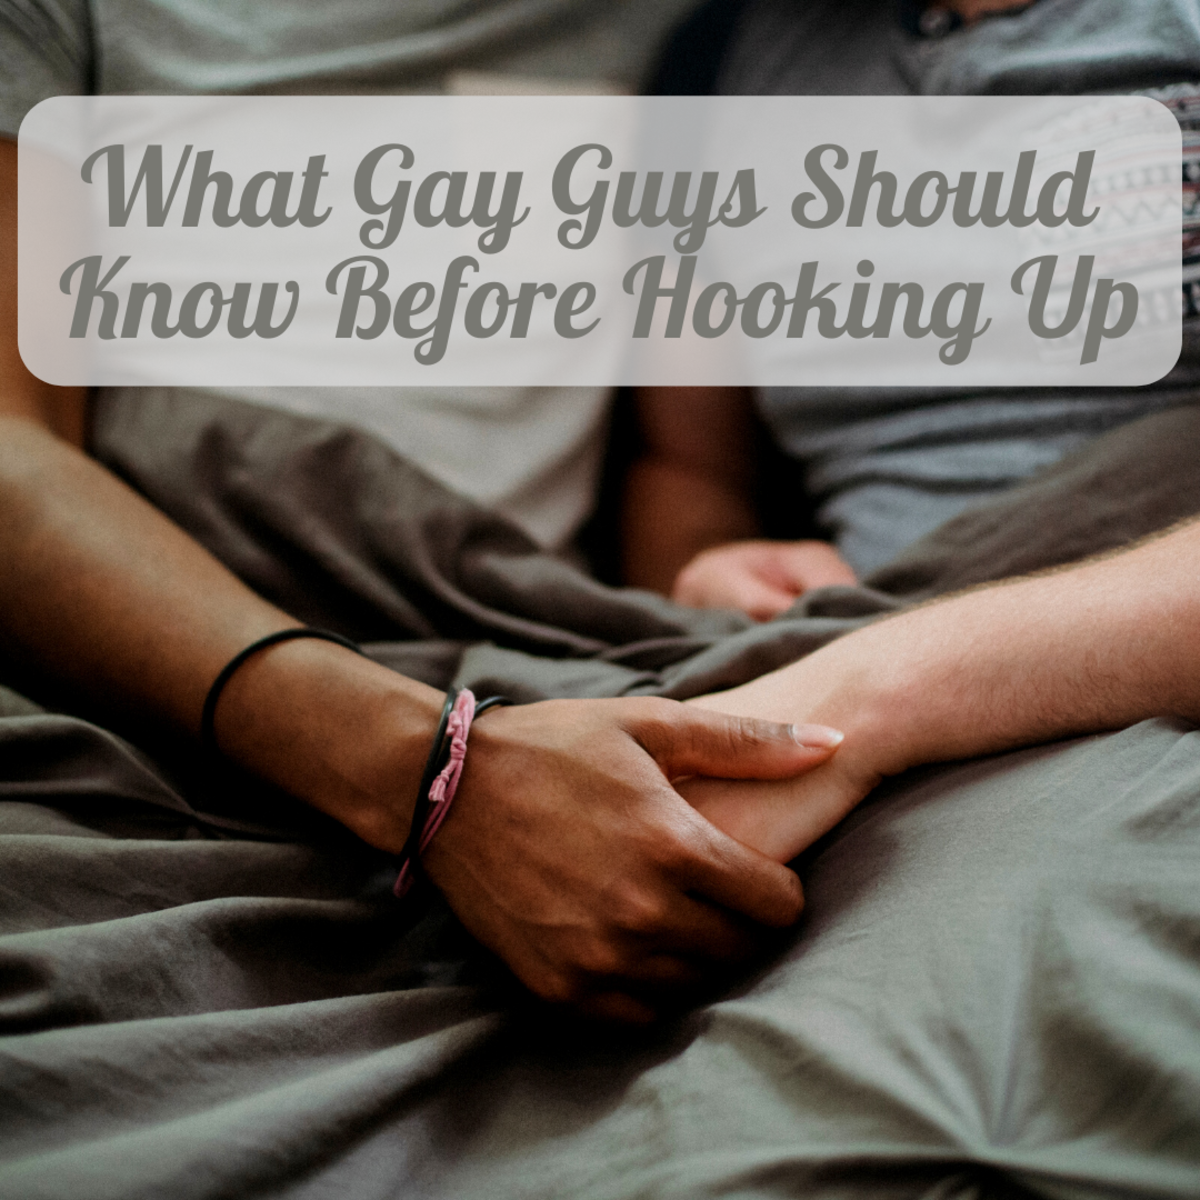 10 Things Every Gay Guy Should Know: Hooking Up